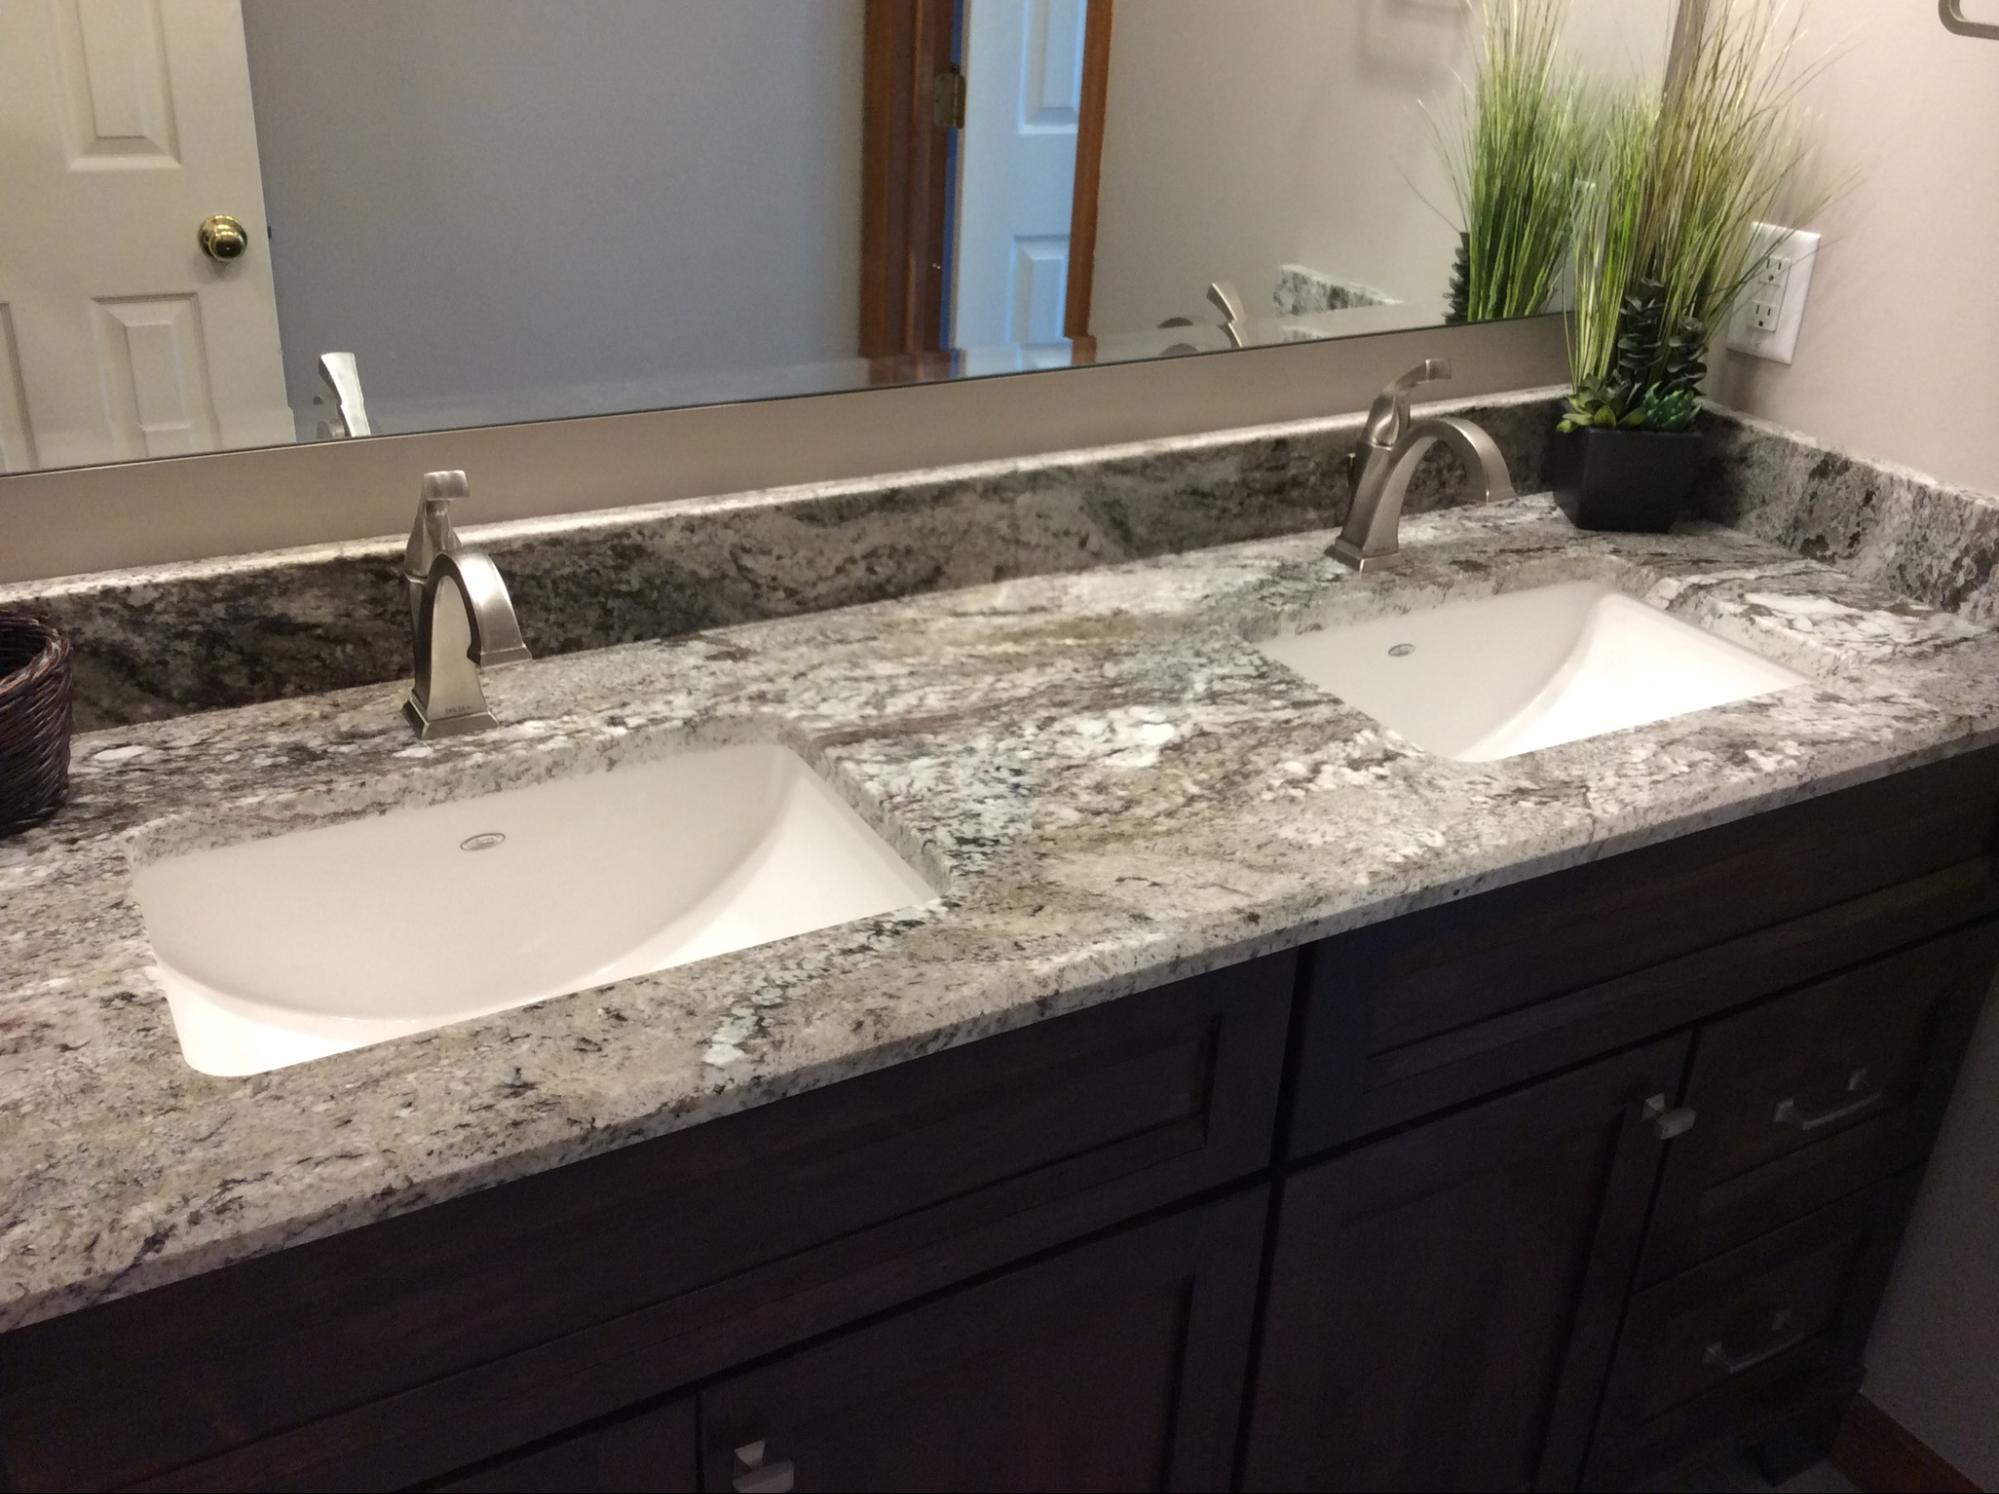 A bathroom with two sinks and bathroom countertops.